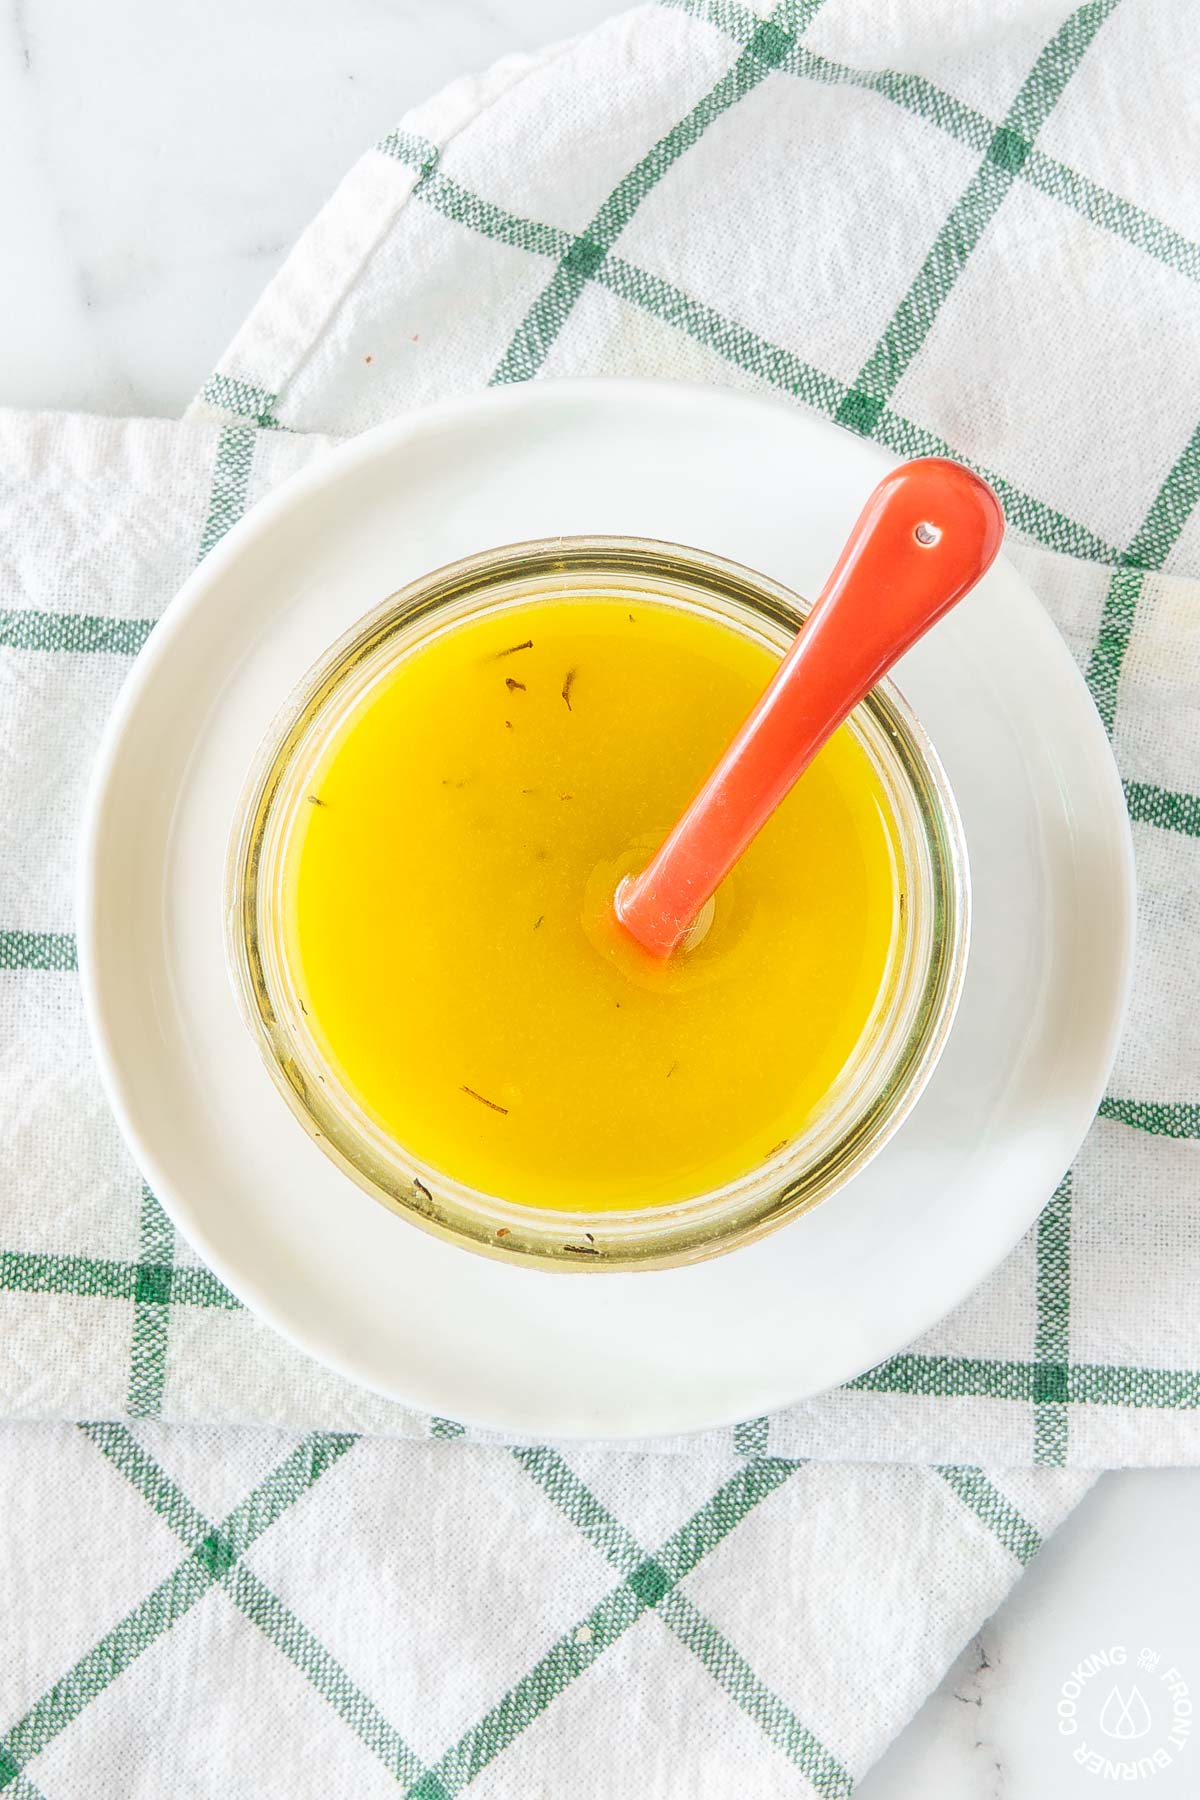 maple vinaigrette dressing in a bowl with spoon